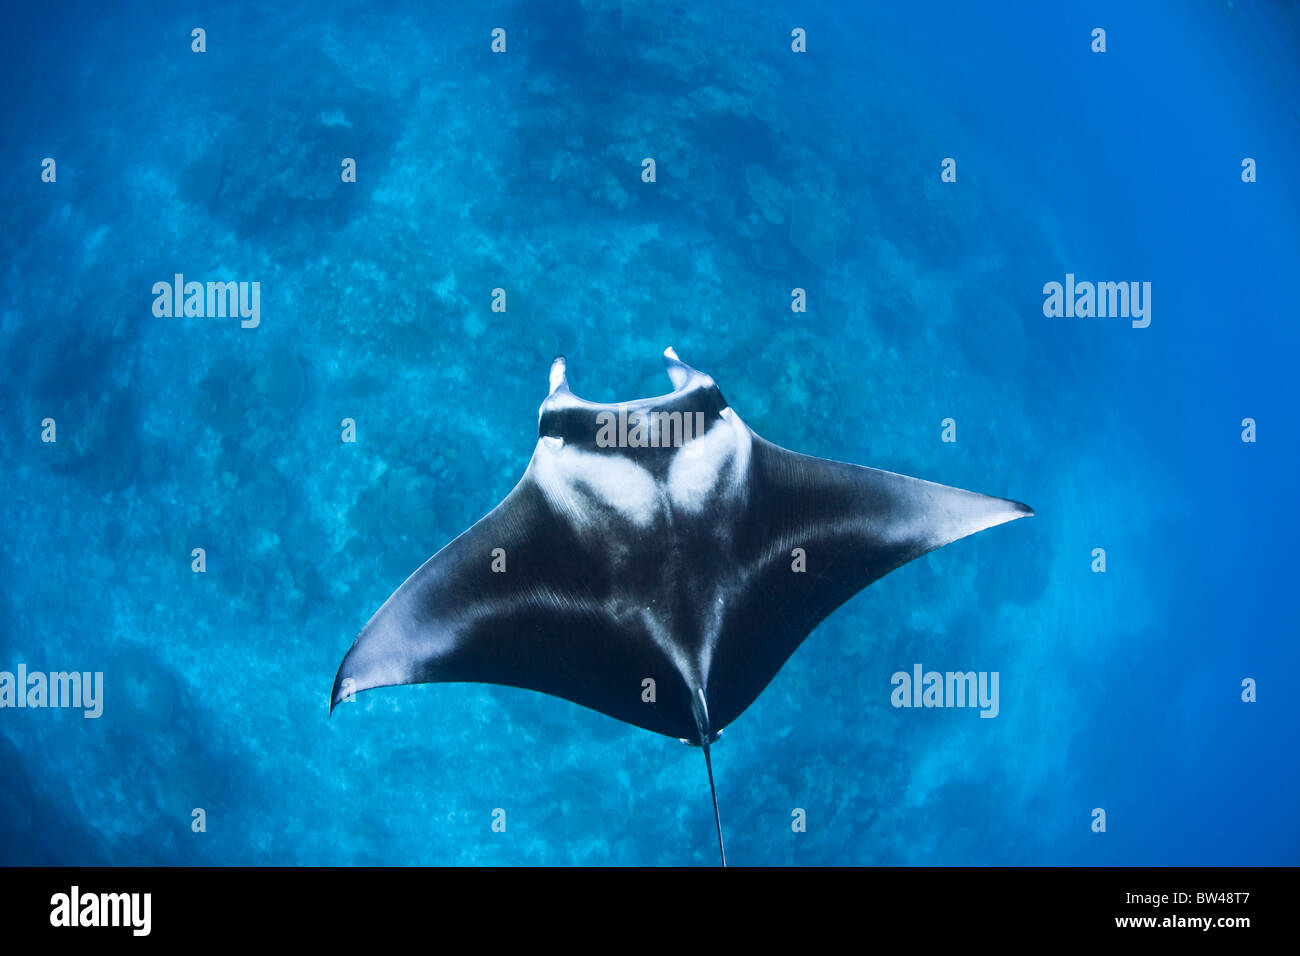 A young manta ray, Manta birostris, glides through blue water in the western Pacific Ocean. Stock Photo